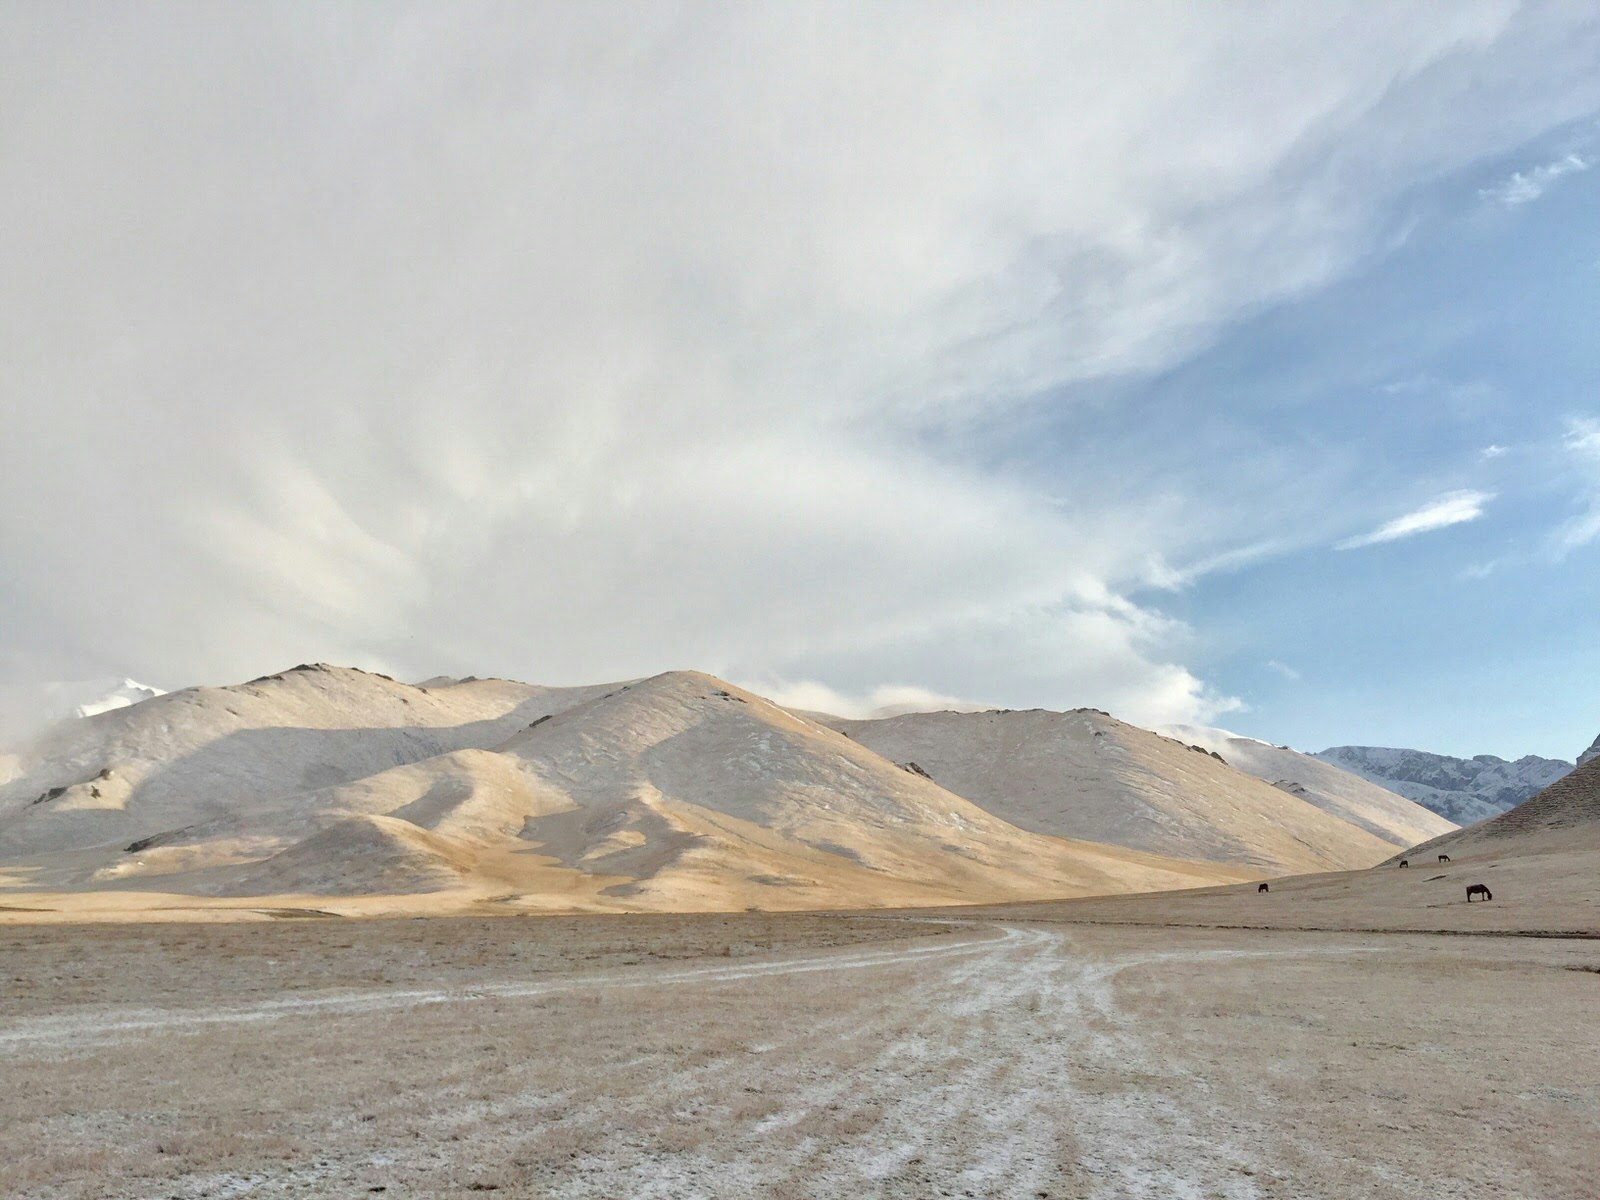 Tan and brown mountains in the distance with a light dusting of white snow, and white clouds above © Megan Eaves / Lonely Planet 